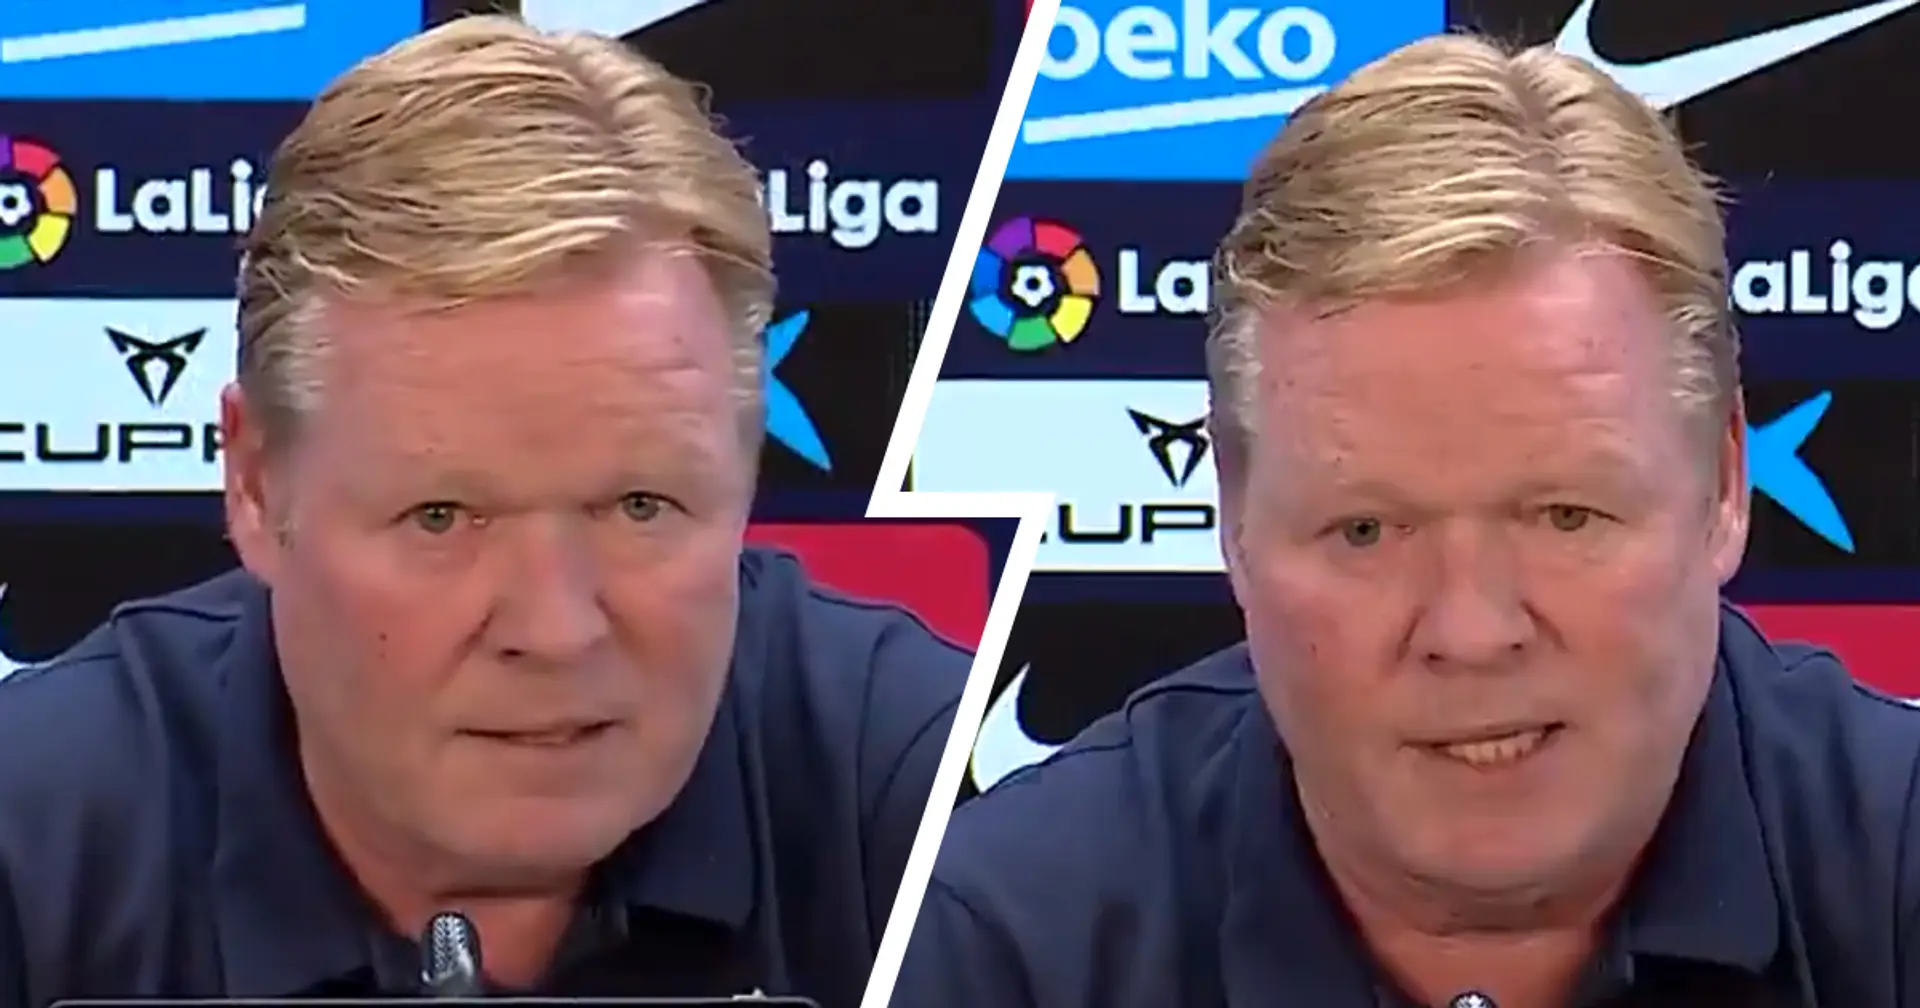 'Barca lost 8-2 to Bayern with Messi, Suarez, Griezmann': Koeman launches fiery rant on sack rumours